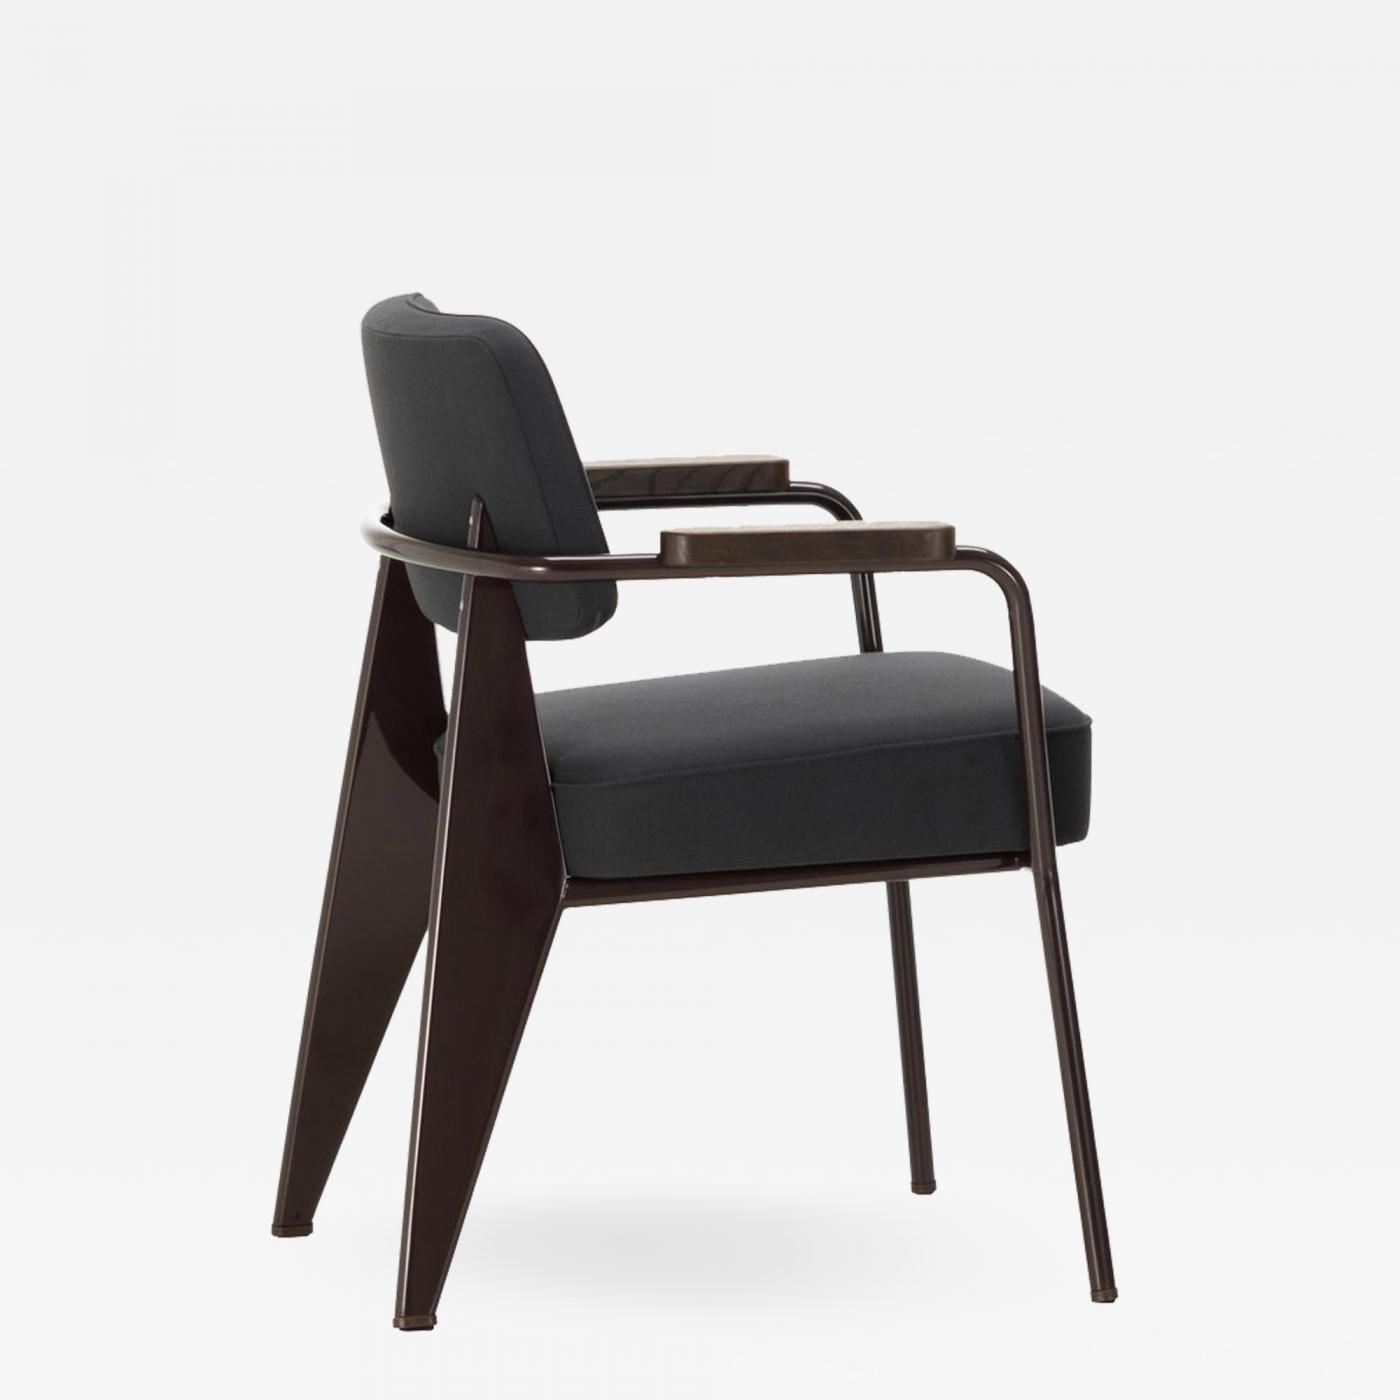 Jean Re-Editions - Vitra Fauteuil Direction in Dark and Chocolate by Prouvé